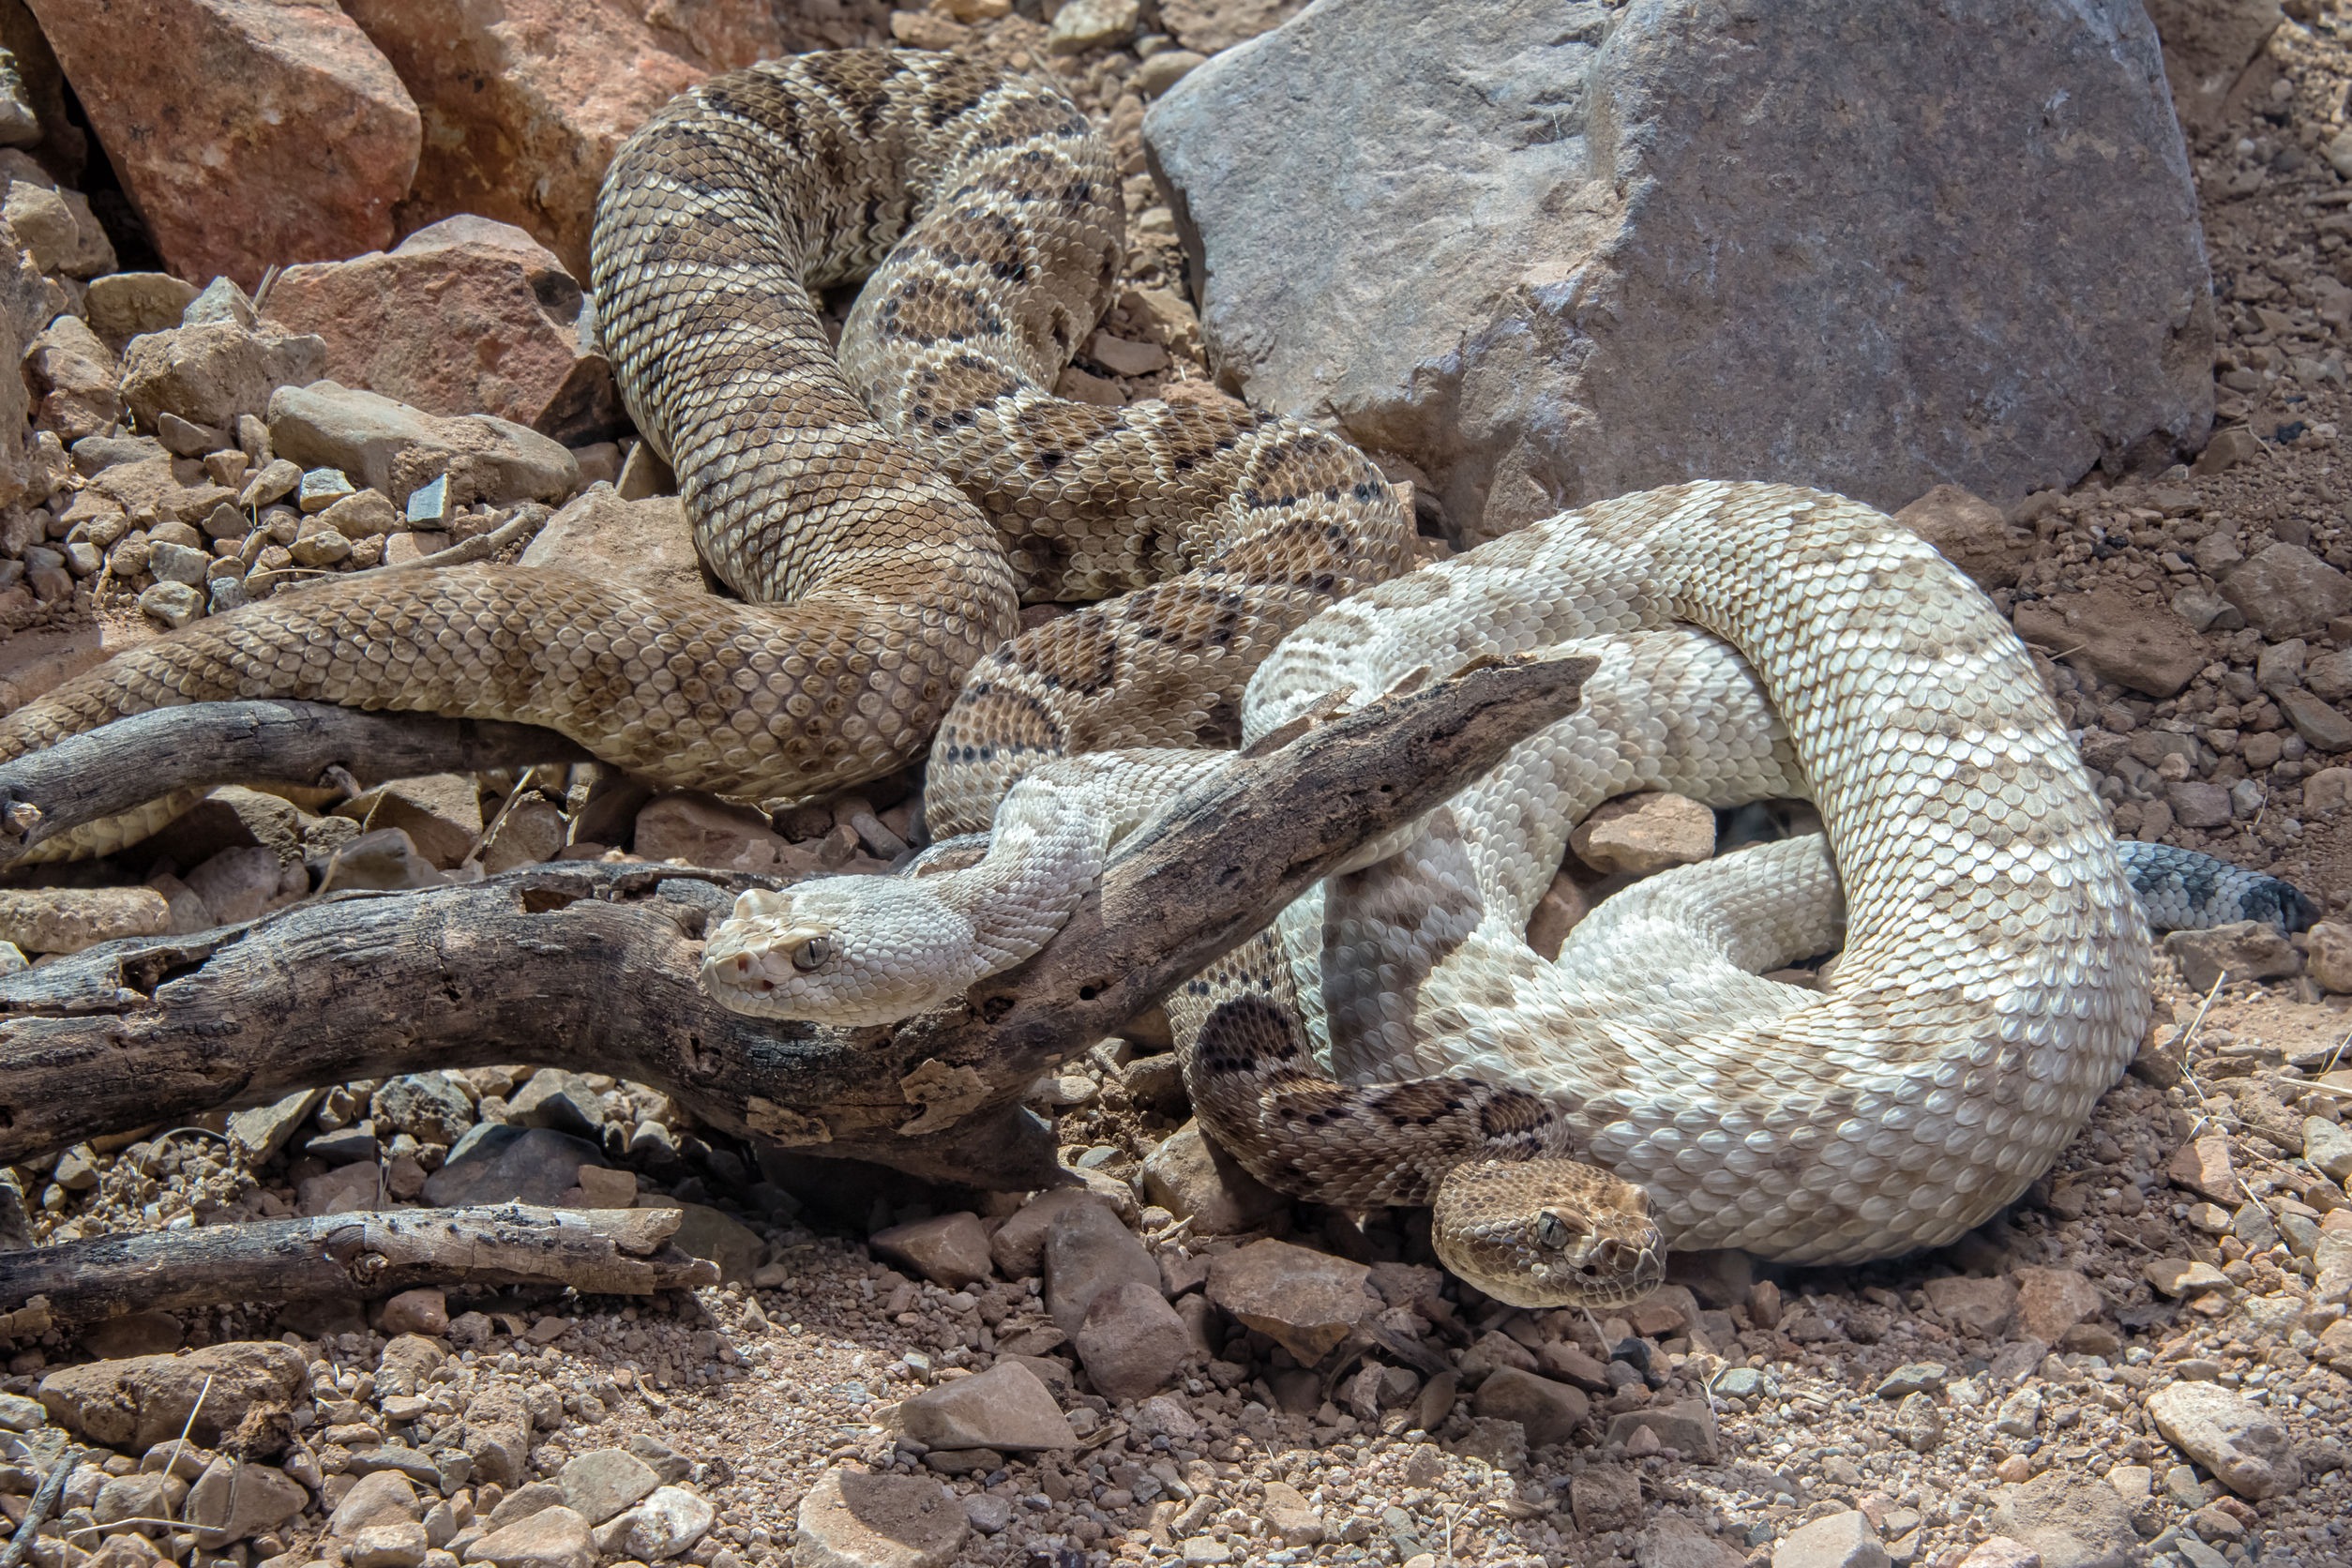 Can Bull Snakes and Rattlesnakes Breed?